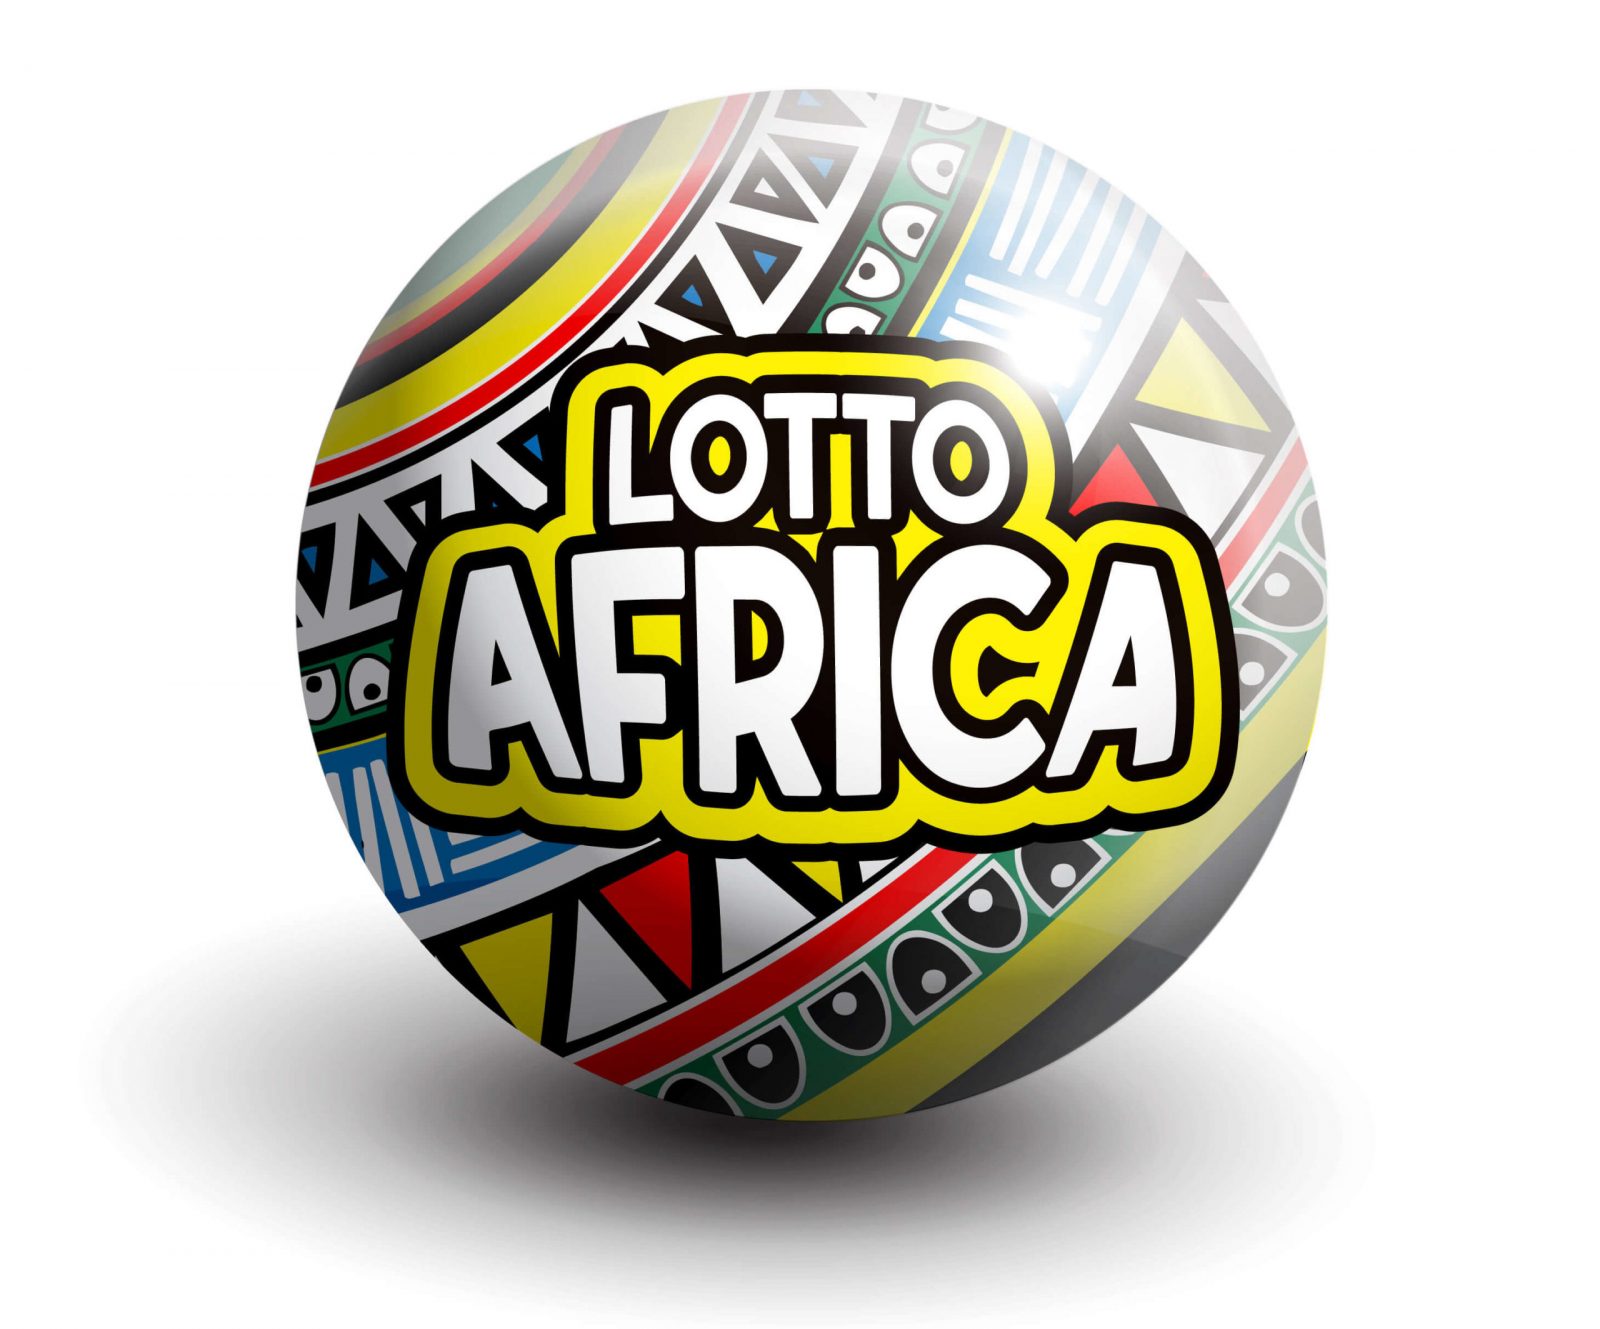 lotto africa